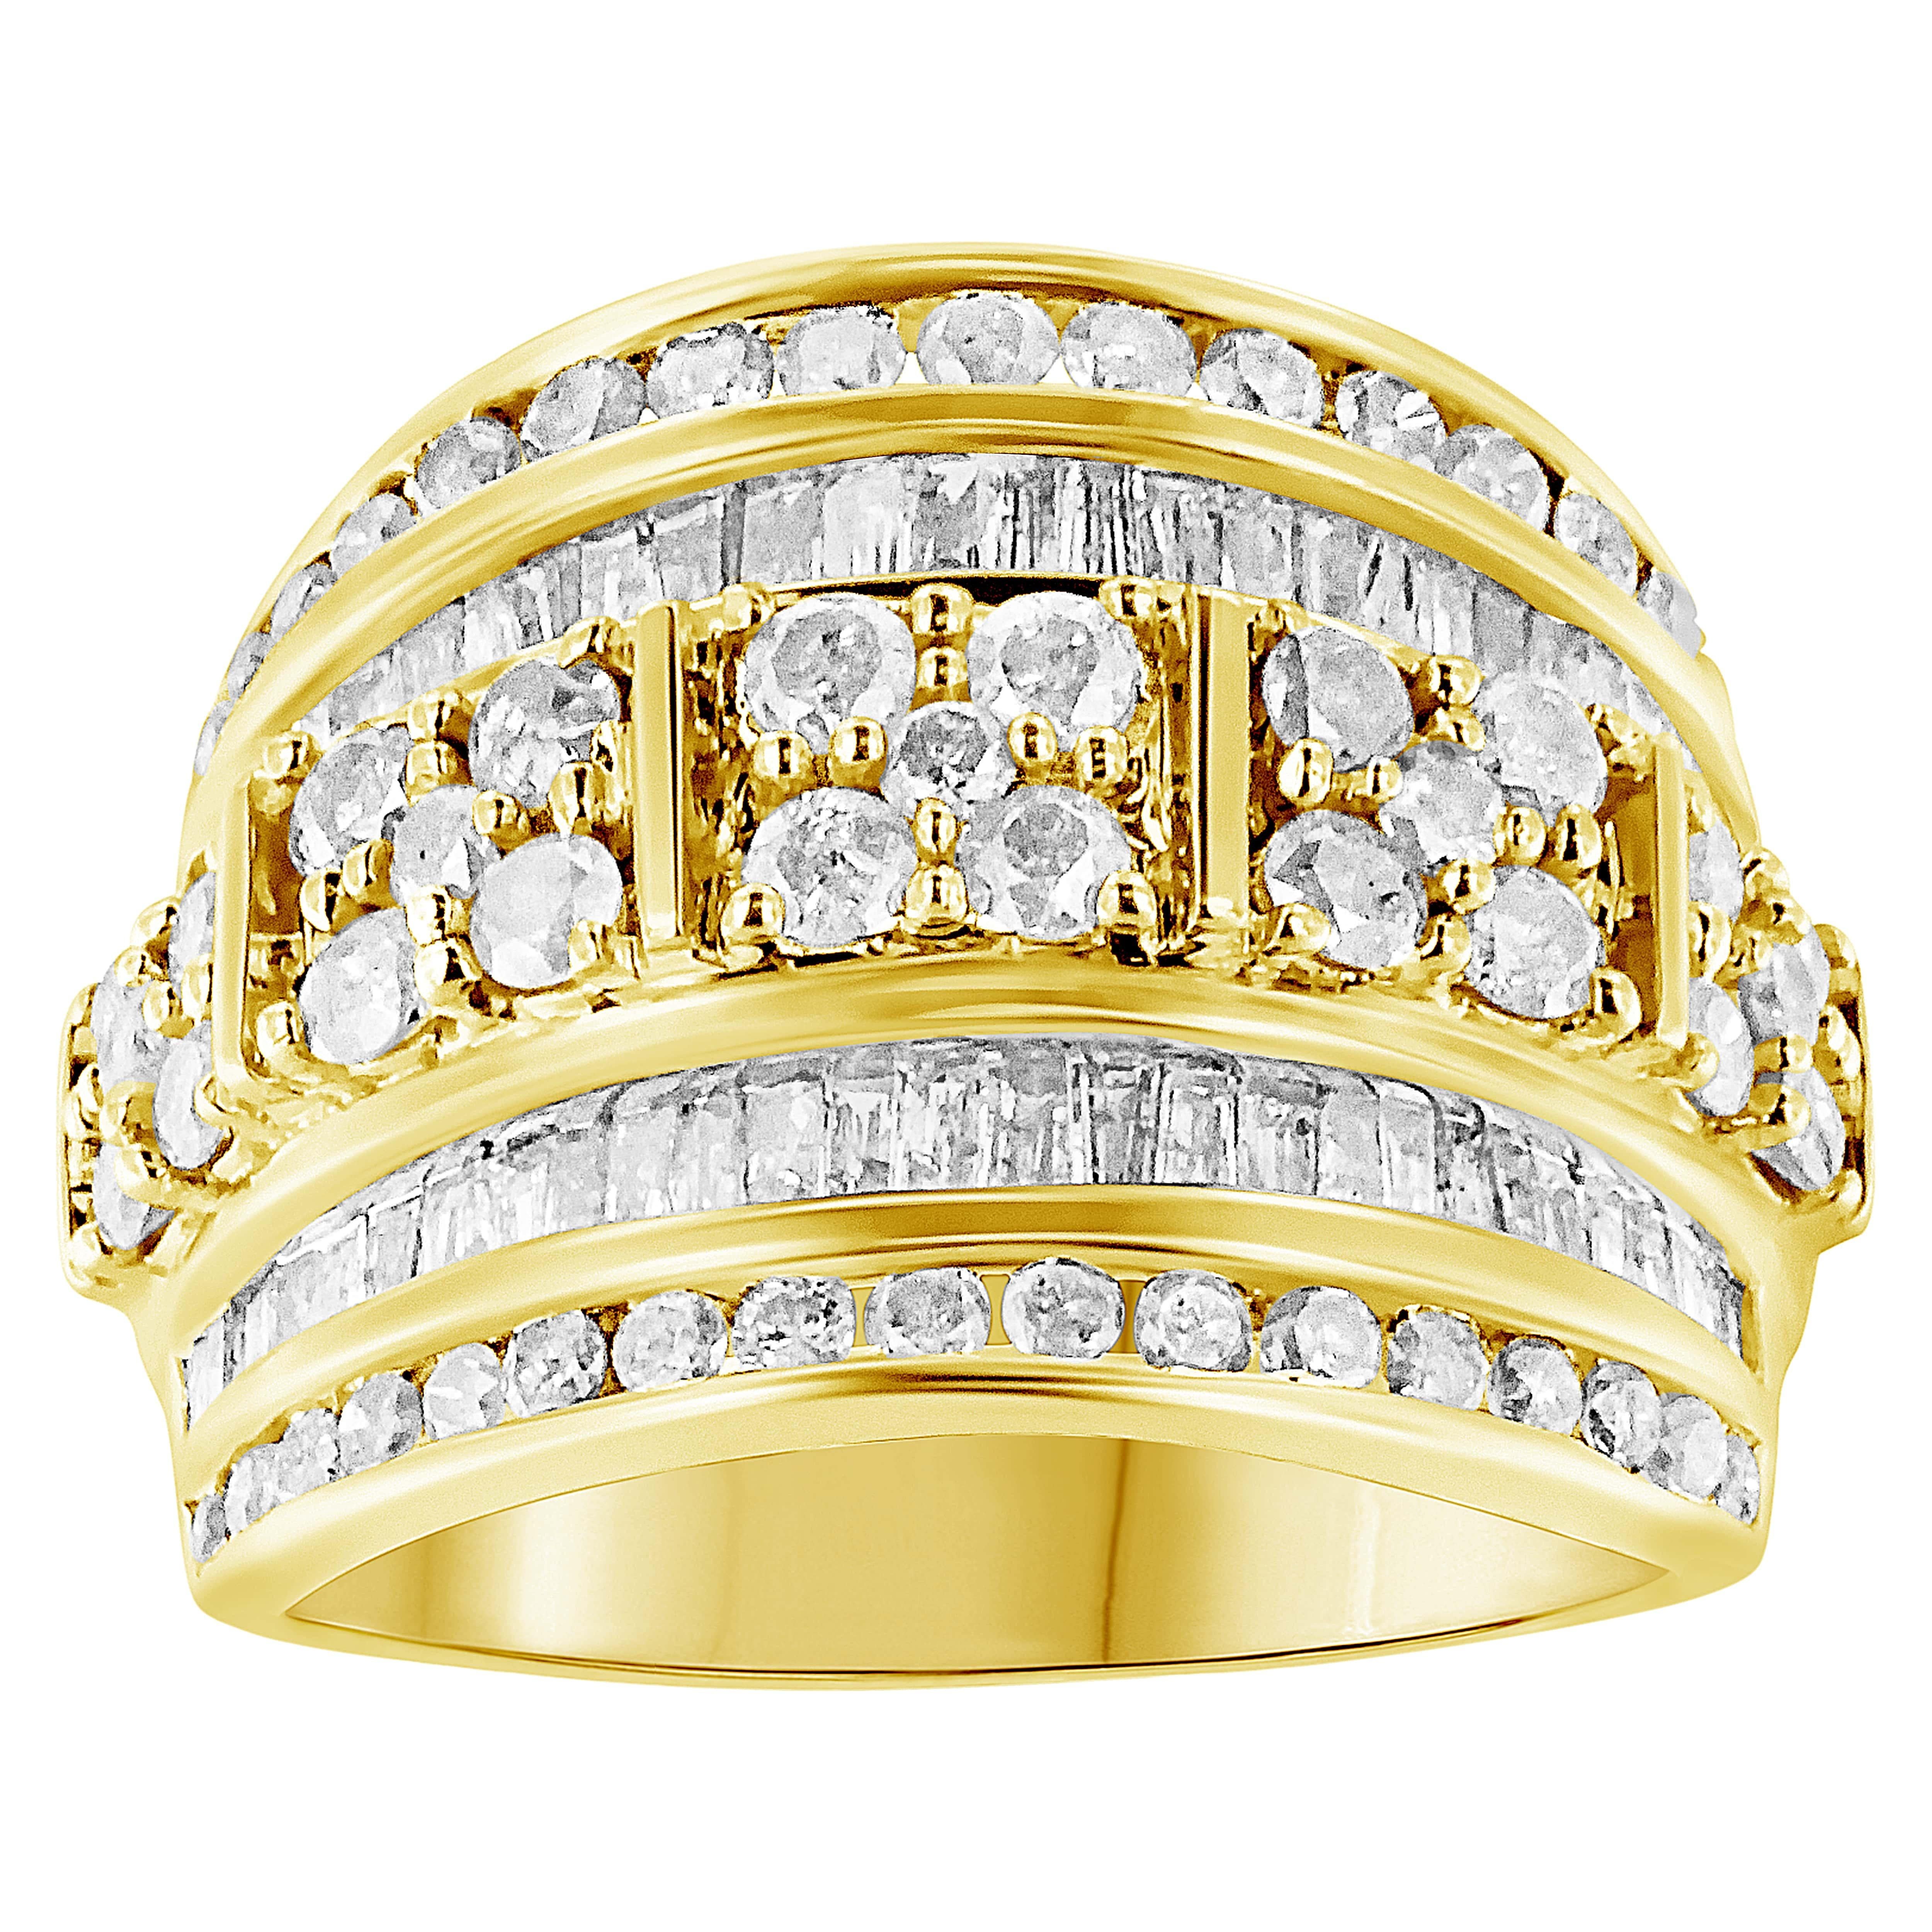 10K Yellow Gold Over Silver 2.0 Cttw Diamond Multi-Row Tapered Cocktail Ring For Sale